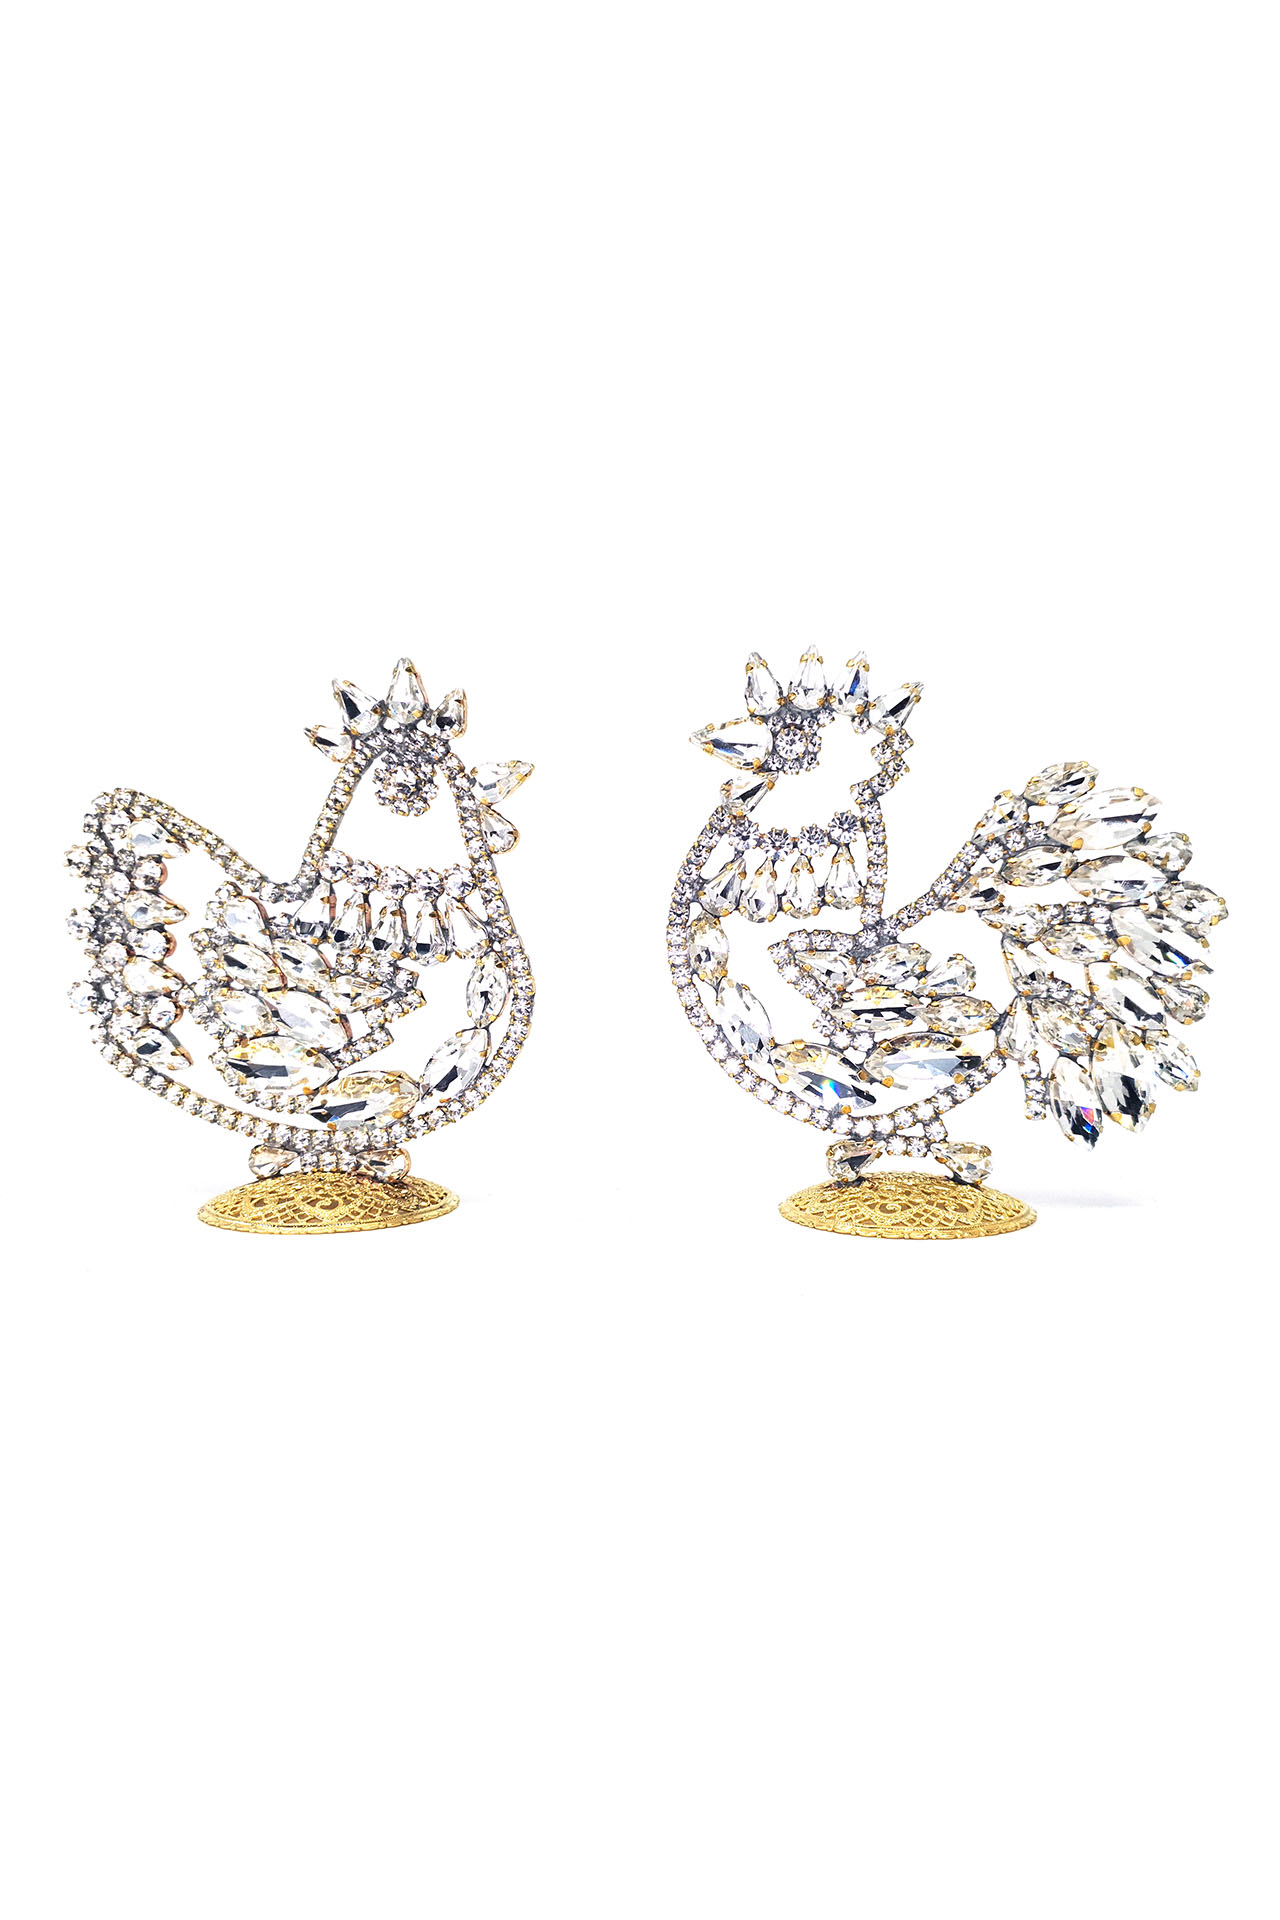 Easter Hen and Easter Rooster in Clear Rhinestone Crystal